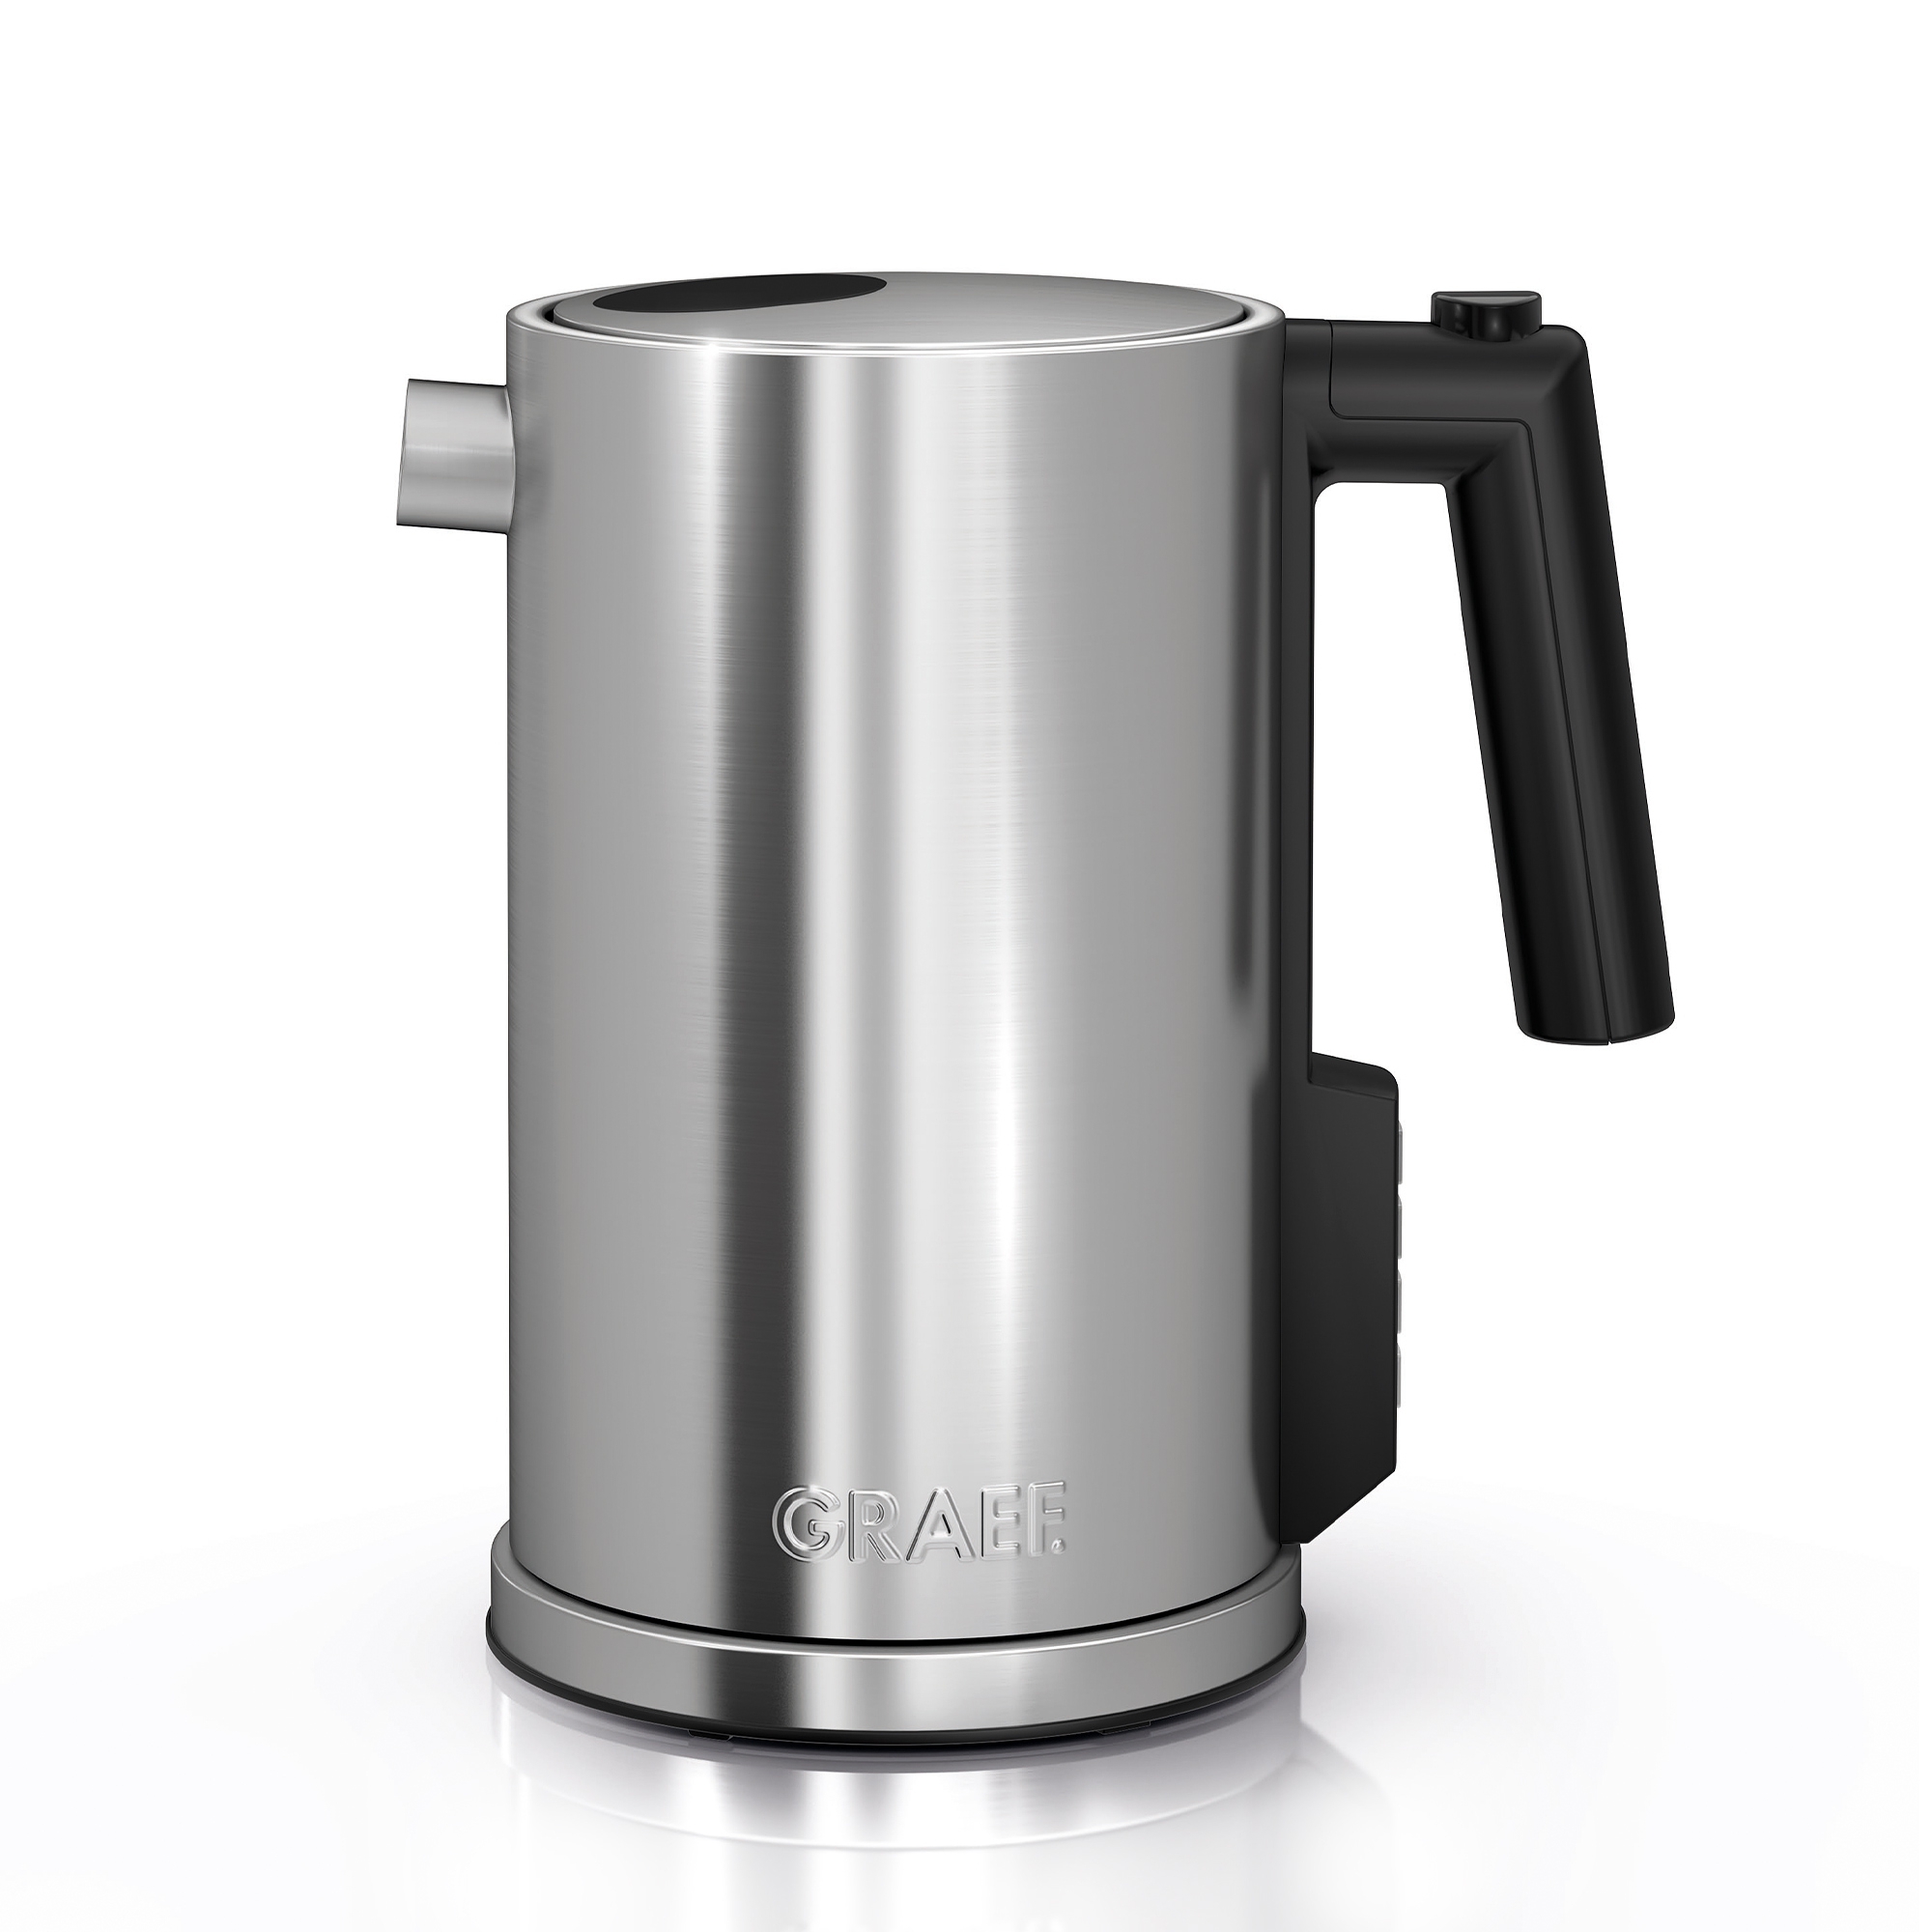 Graef - Stainless Steel Electric Kettle WK 900